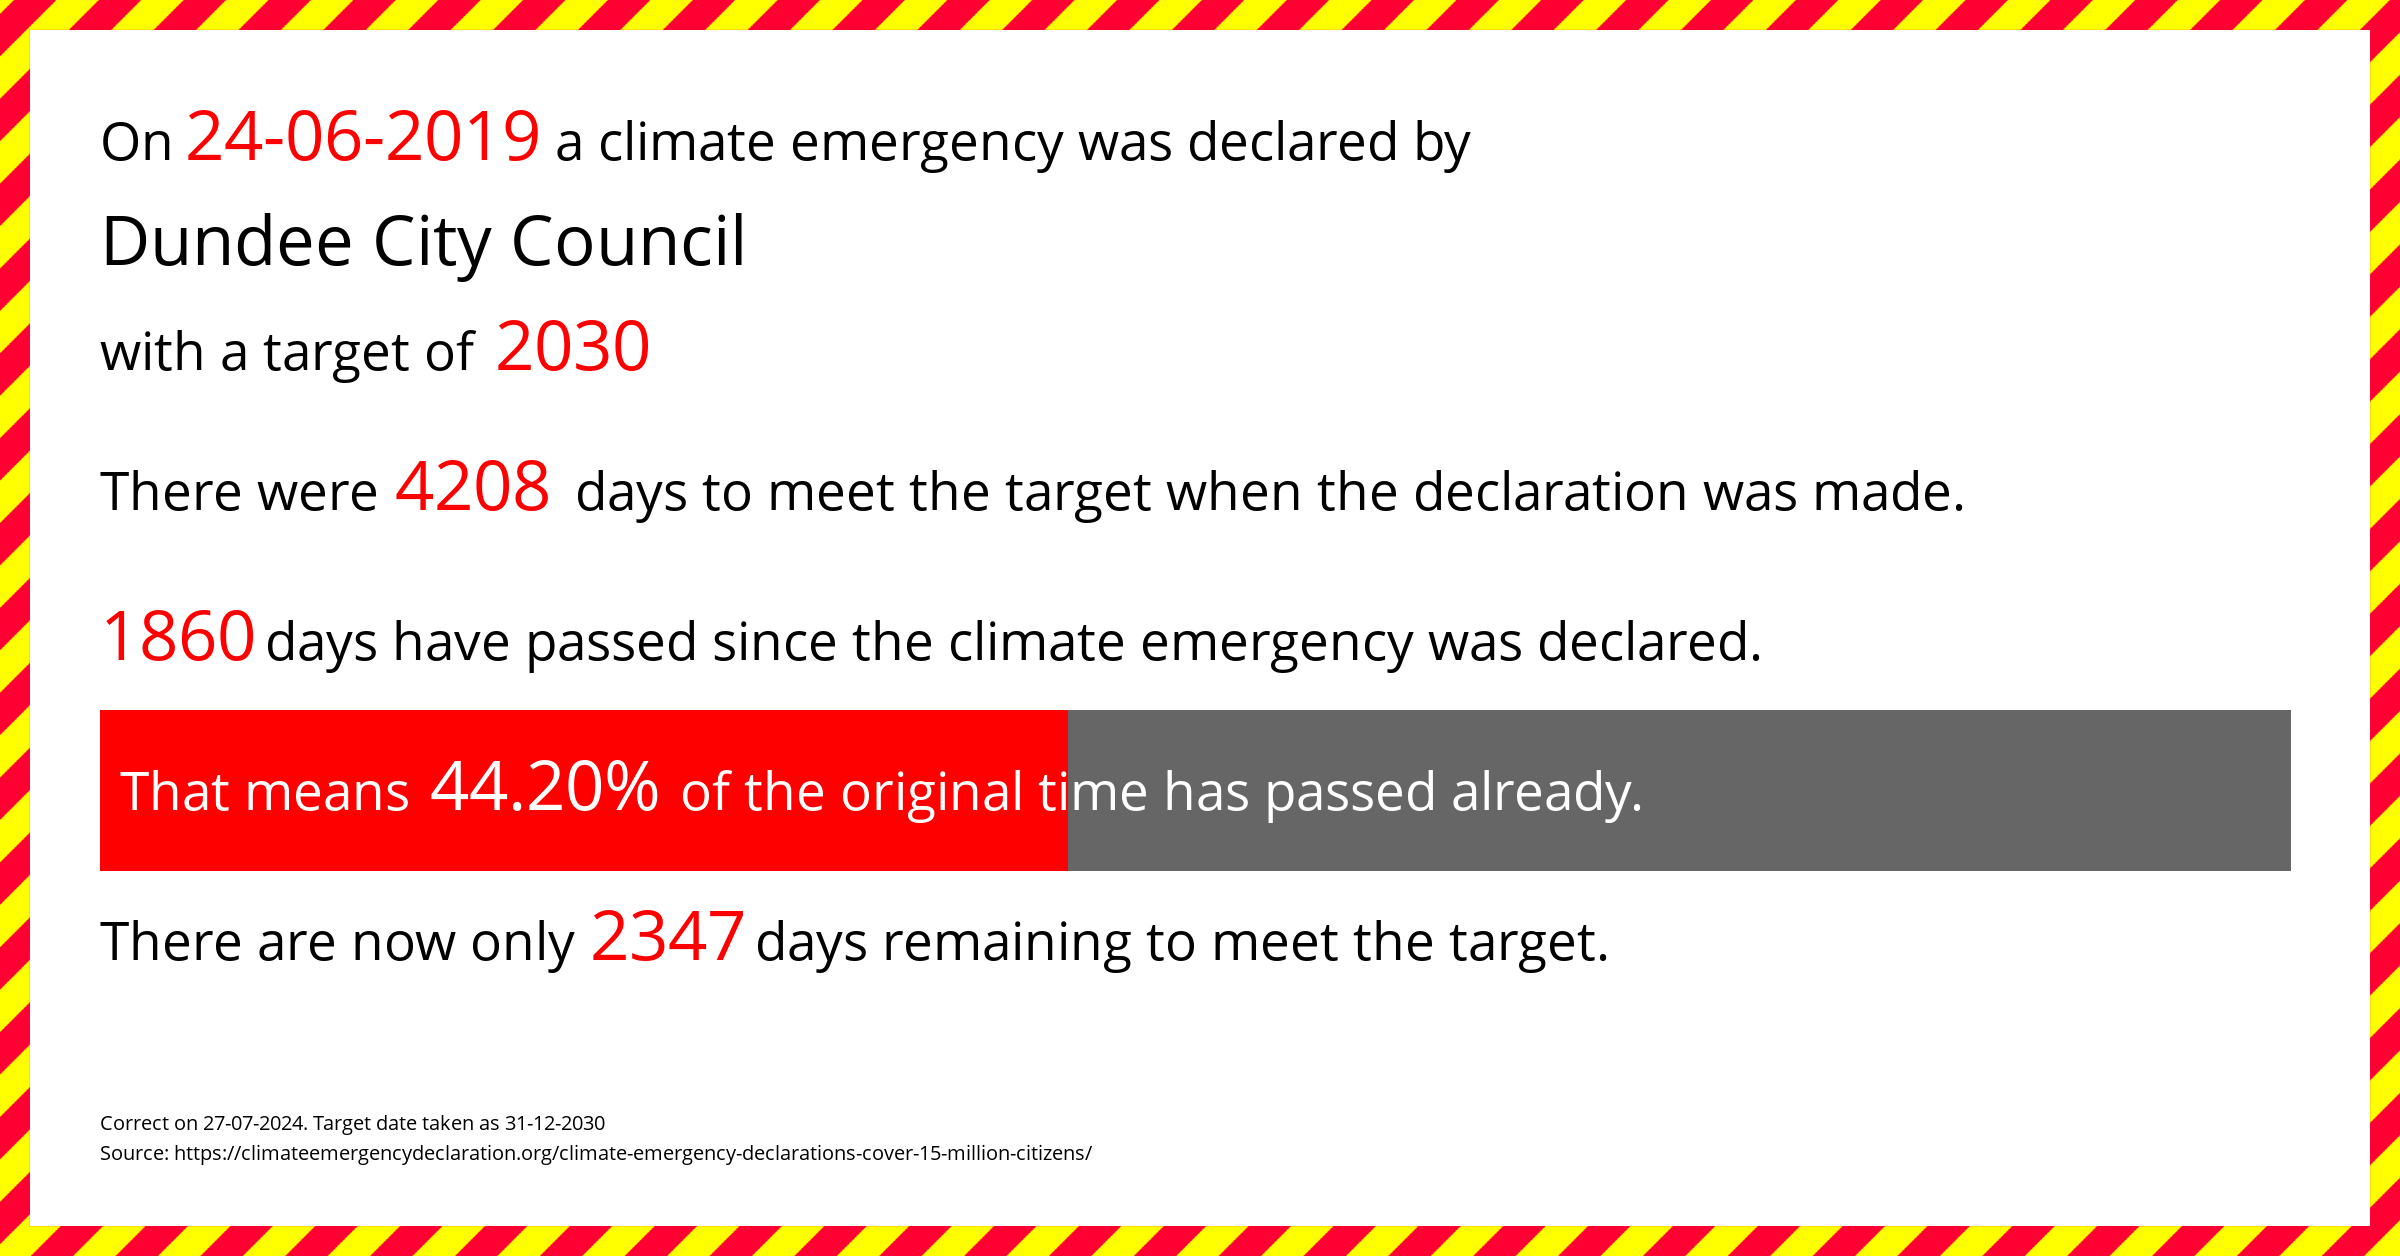 Dundee City Council declared a Climate emergency on Monday 24th June 2019, with a target of 2030.